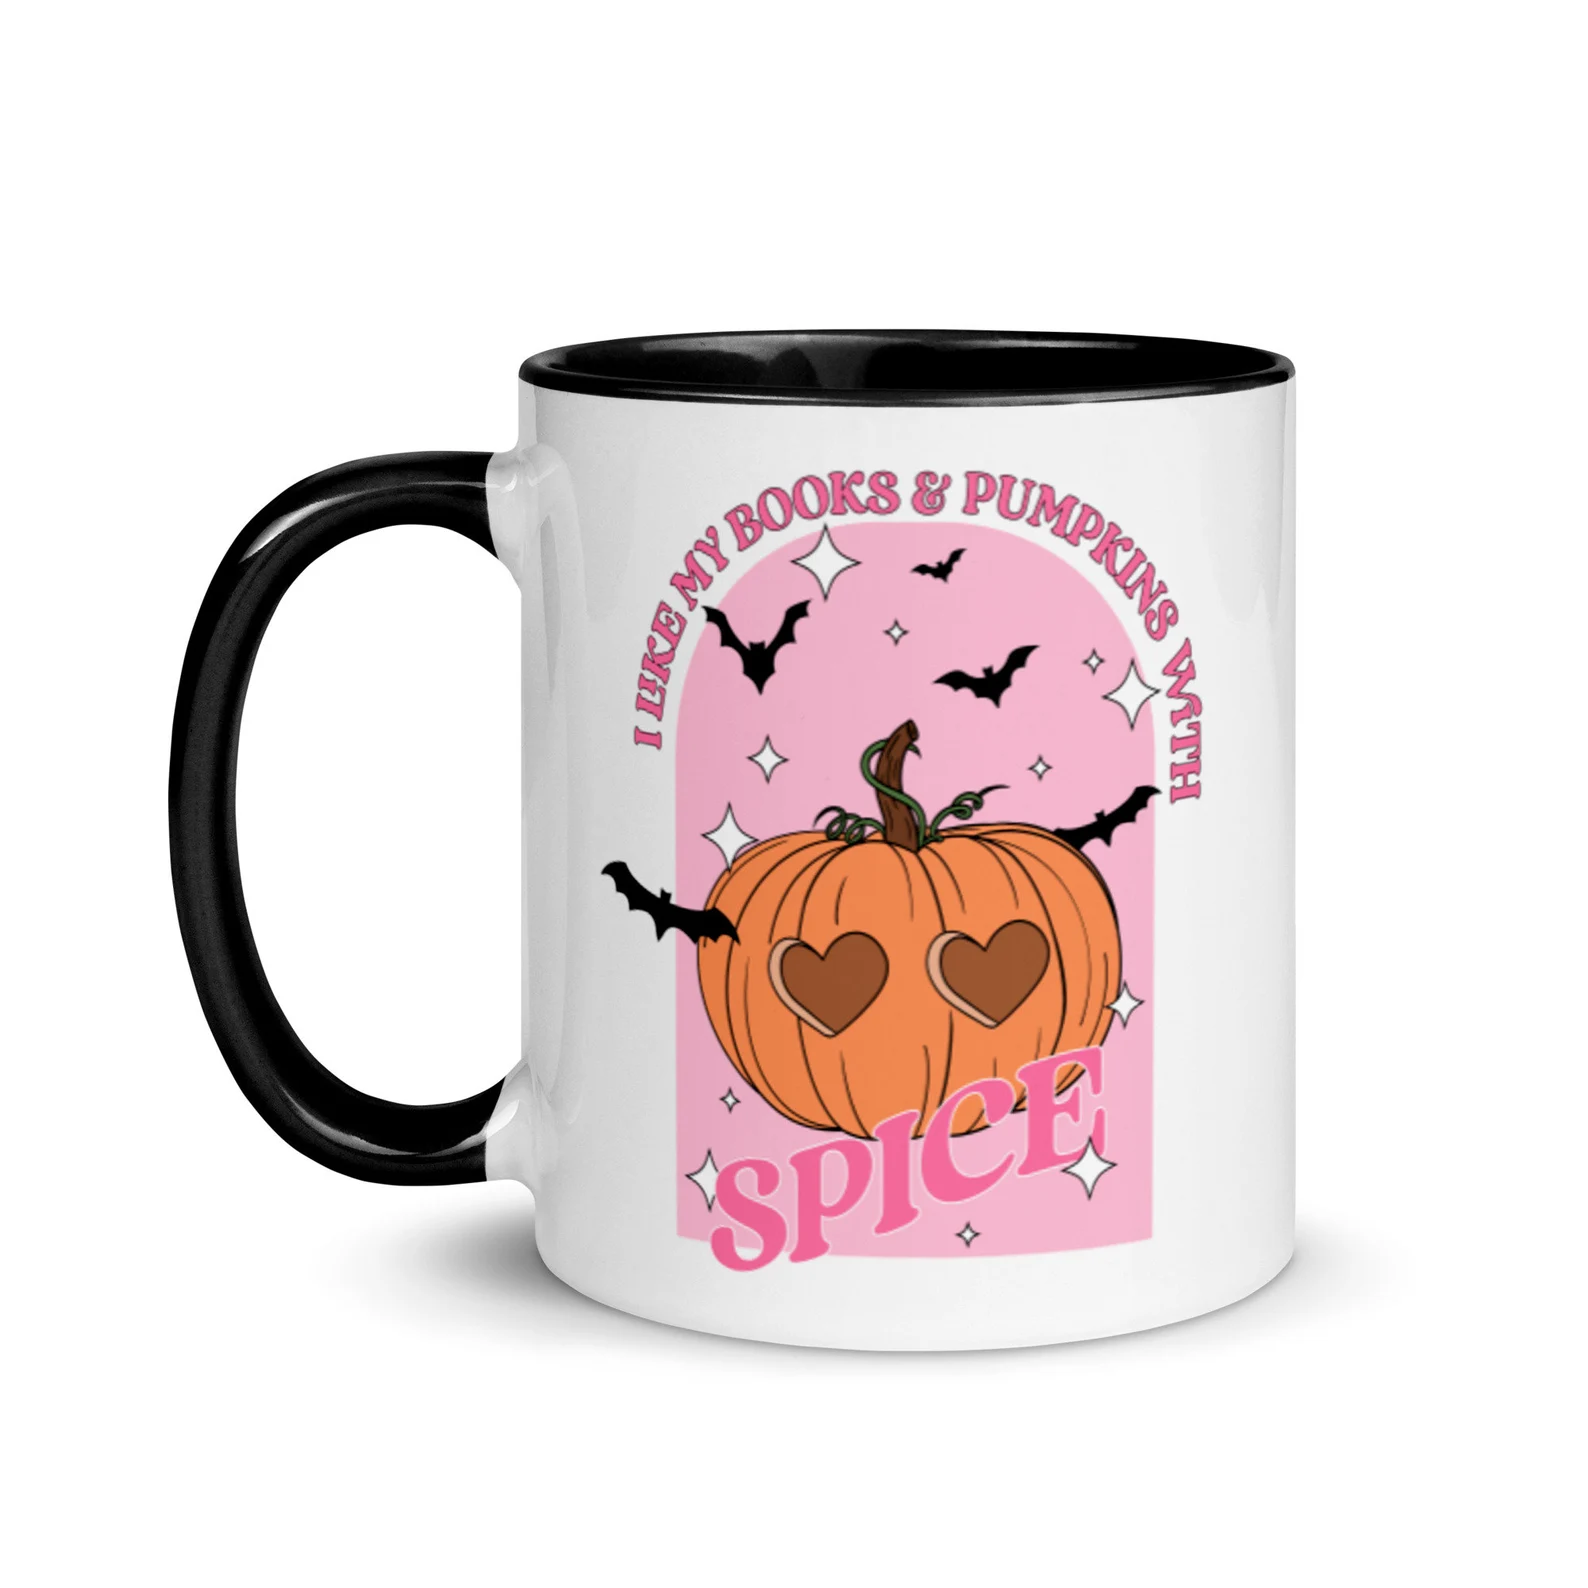 a mug with a pumpkin on it that reads "I like my books and pumpkins with spice"